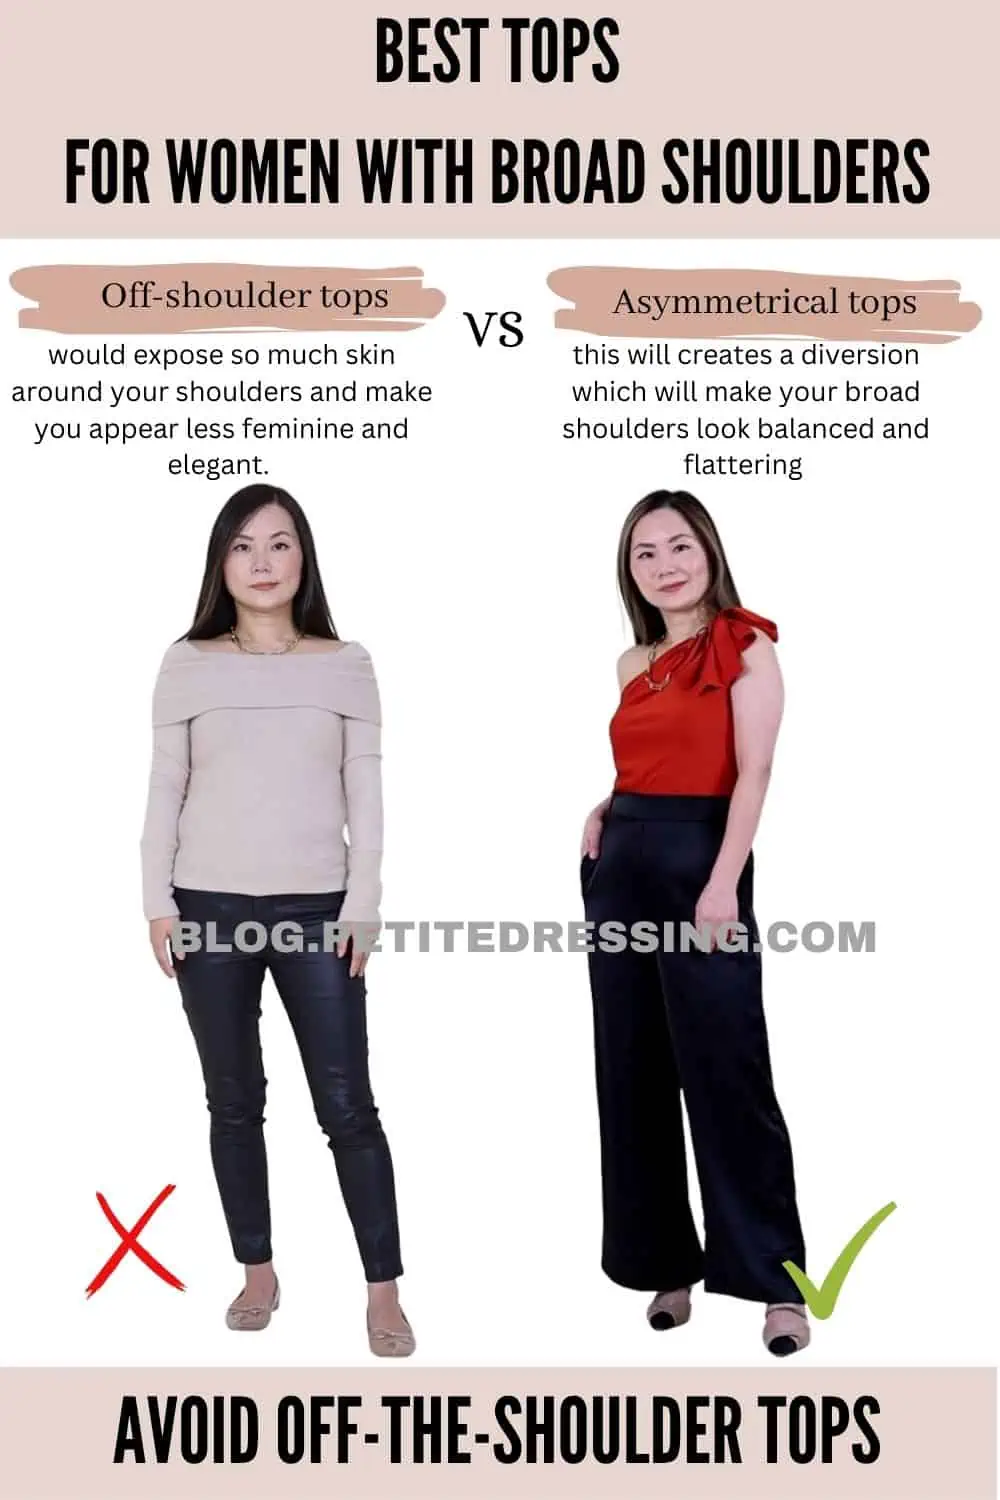 22 Fashion Tips for Broad Shoulder Women - How To Reduce Broad Shoulders